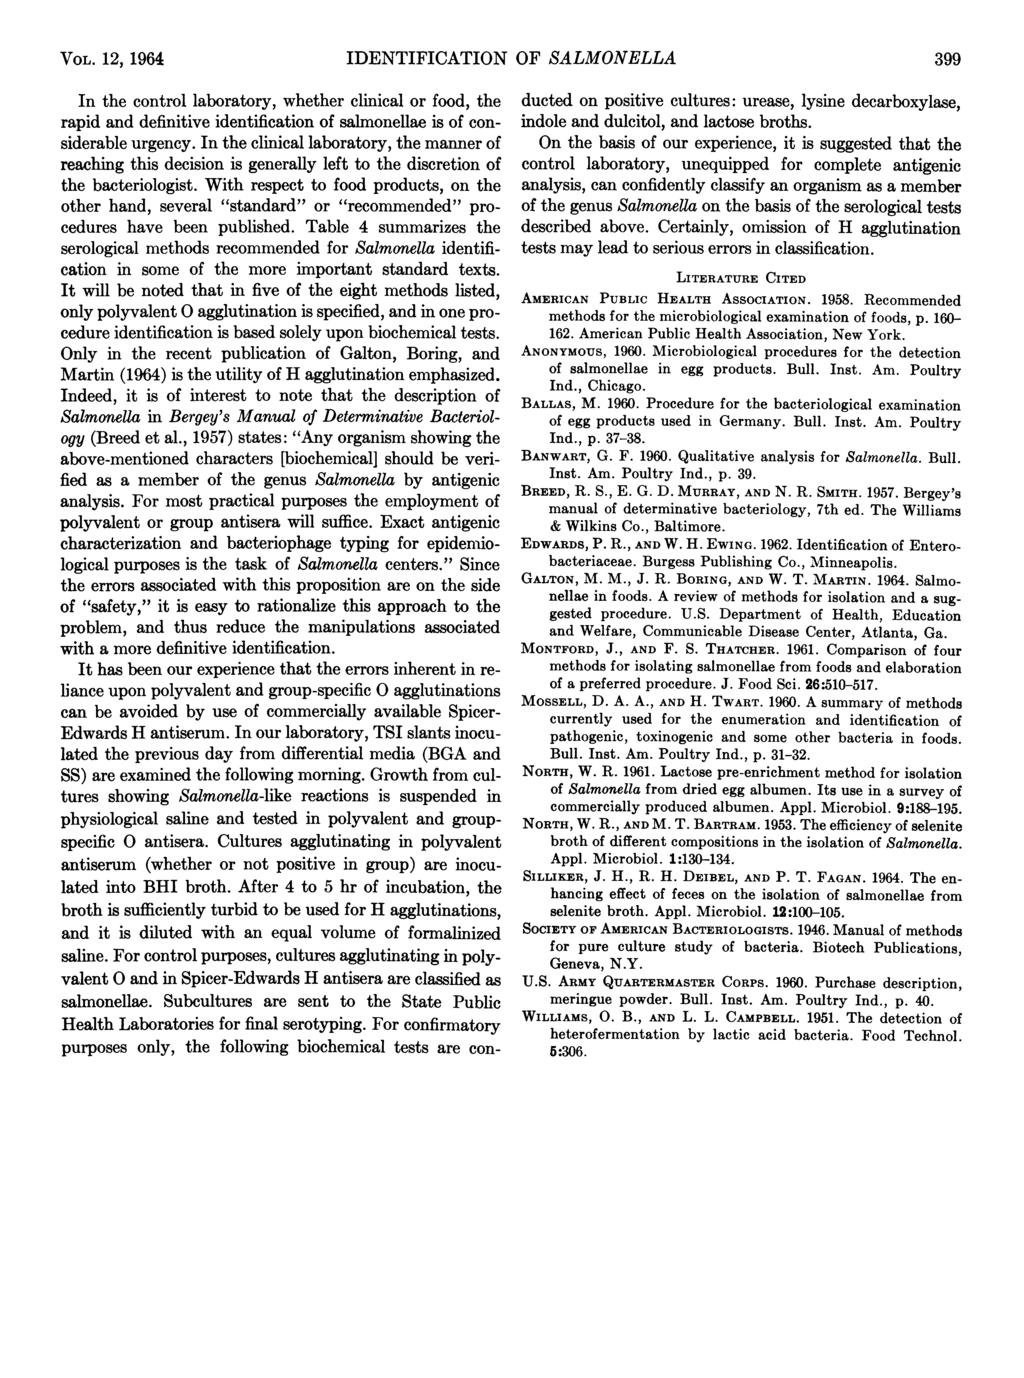 VOL. 12) 1964 IDENTIFICATION OF SALMONELLA 399 In the control laboratory, whether clinical or food, the rapid and definitive identification of salmonellae is of considerable urgency.